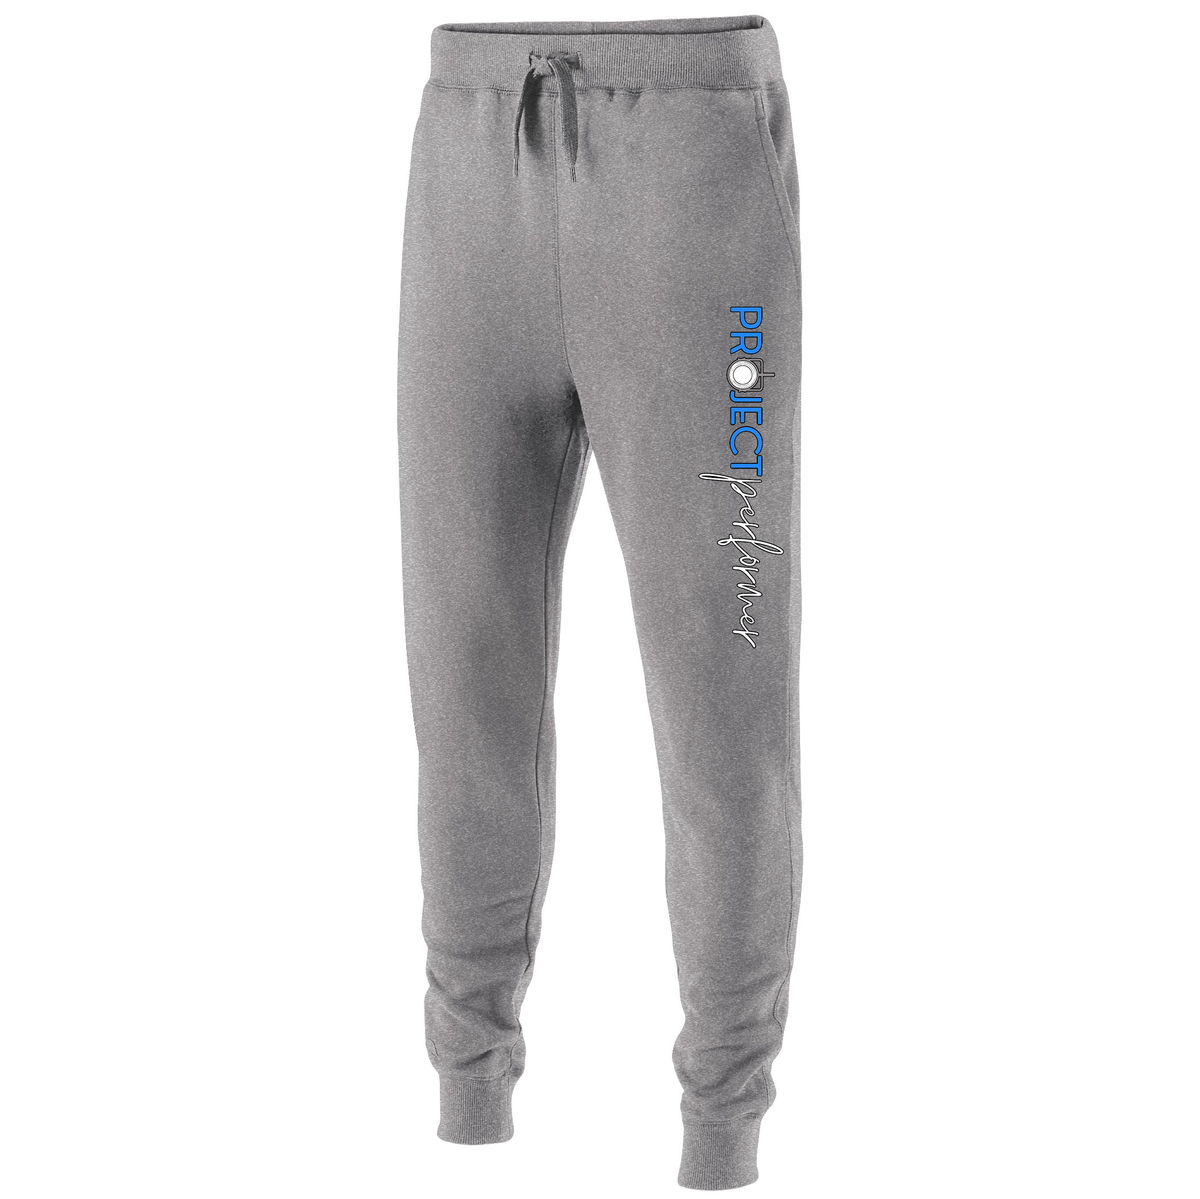 Project Performer Youth 60/40 Fleece Jogger